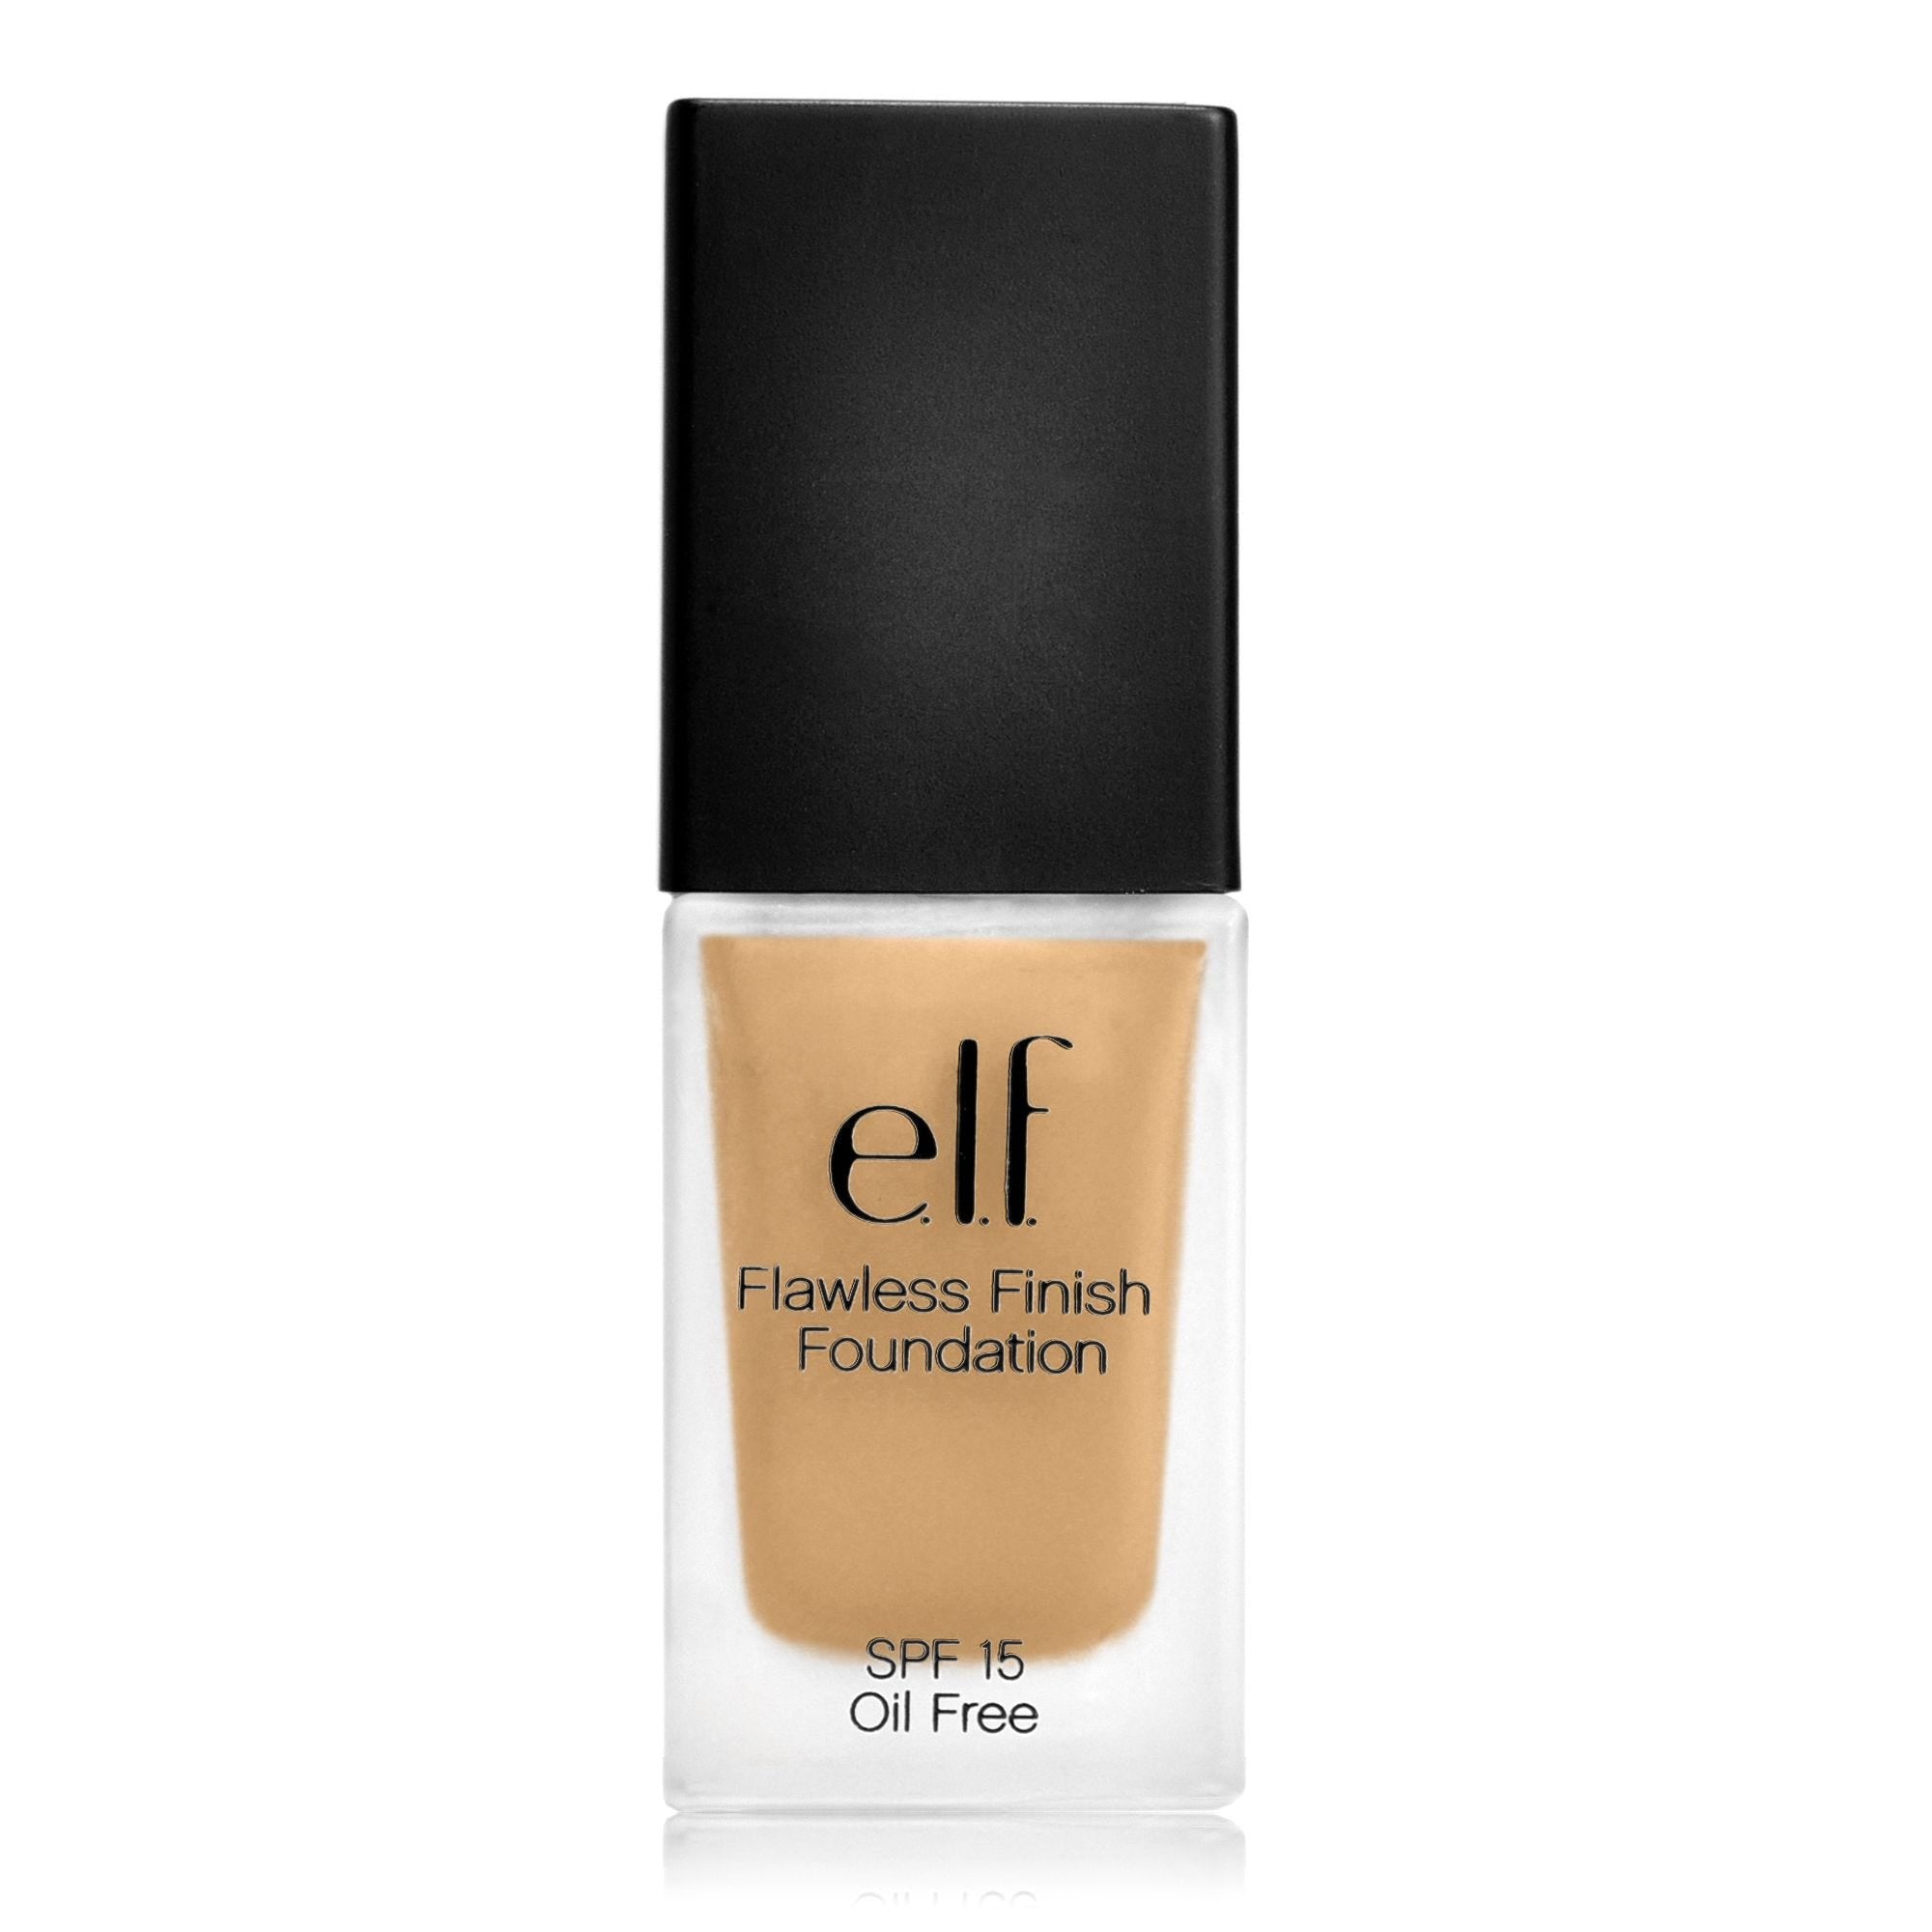 Flawless Finish Foundation SPF 15 - Makeup